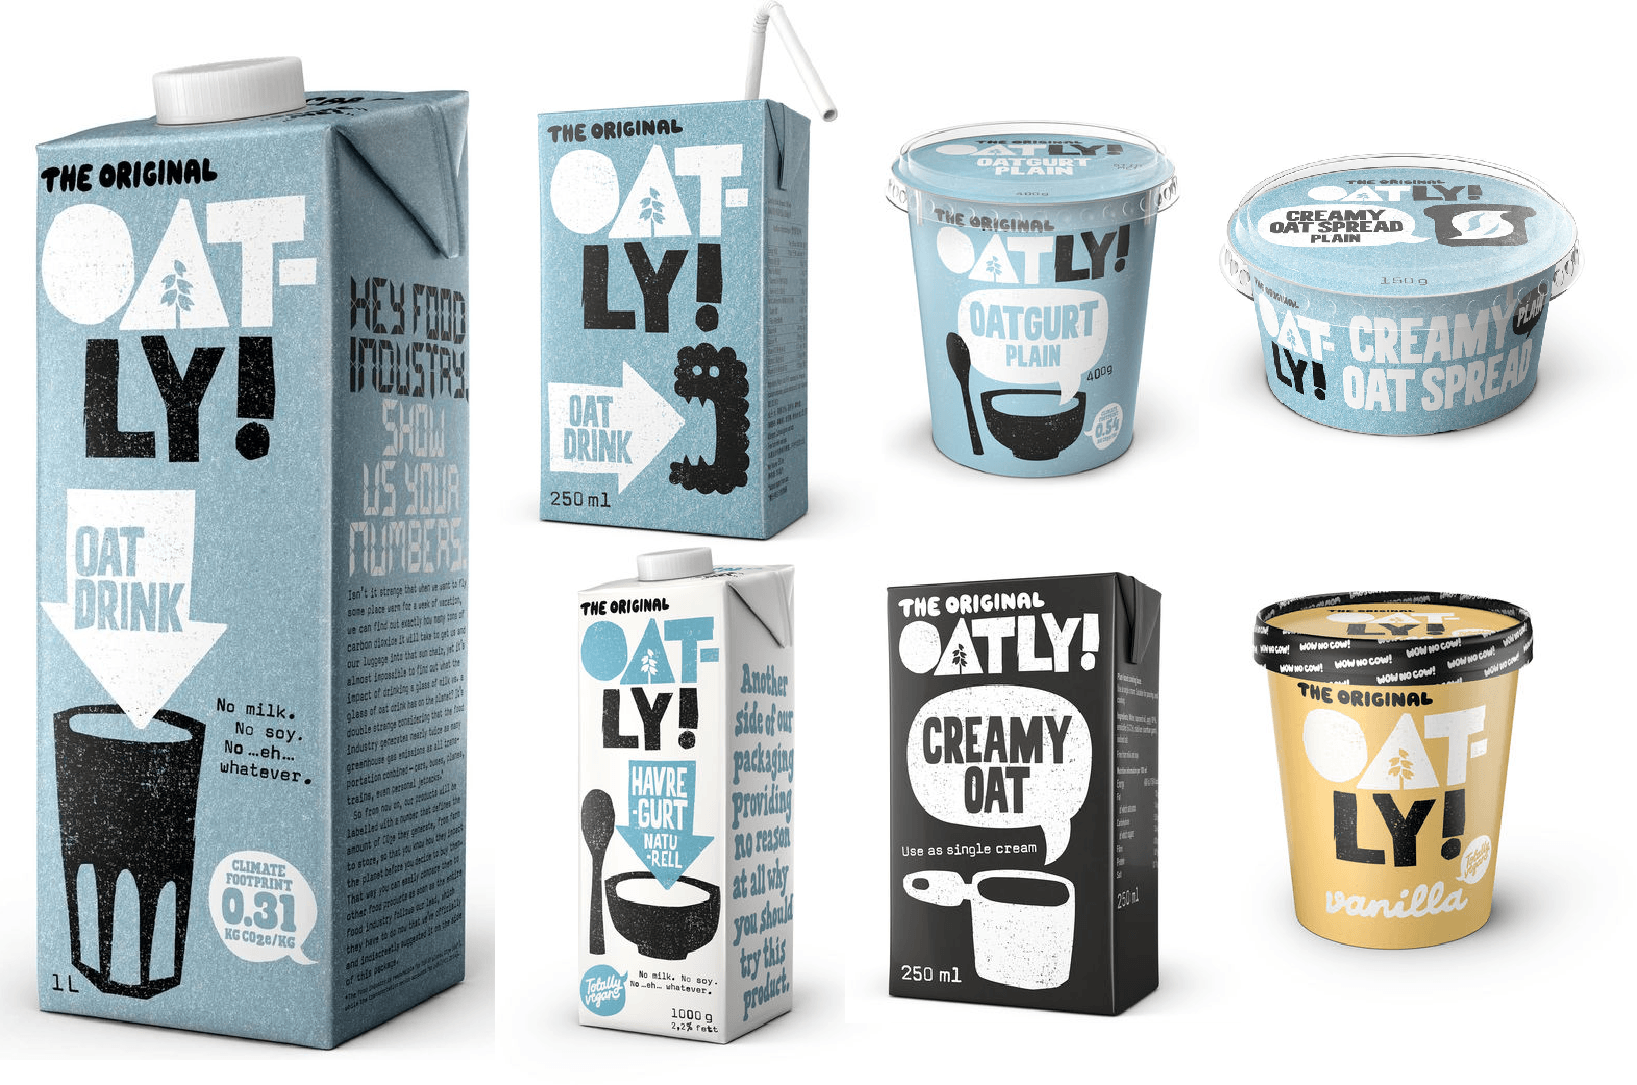 Oatly ipo stock symbol cash flow direct method investing activities involve